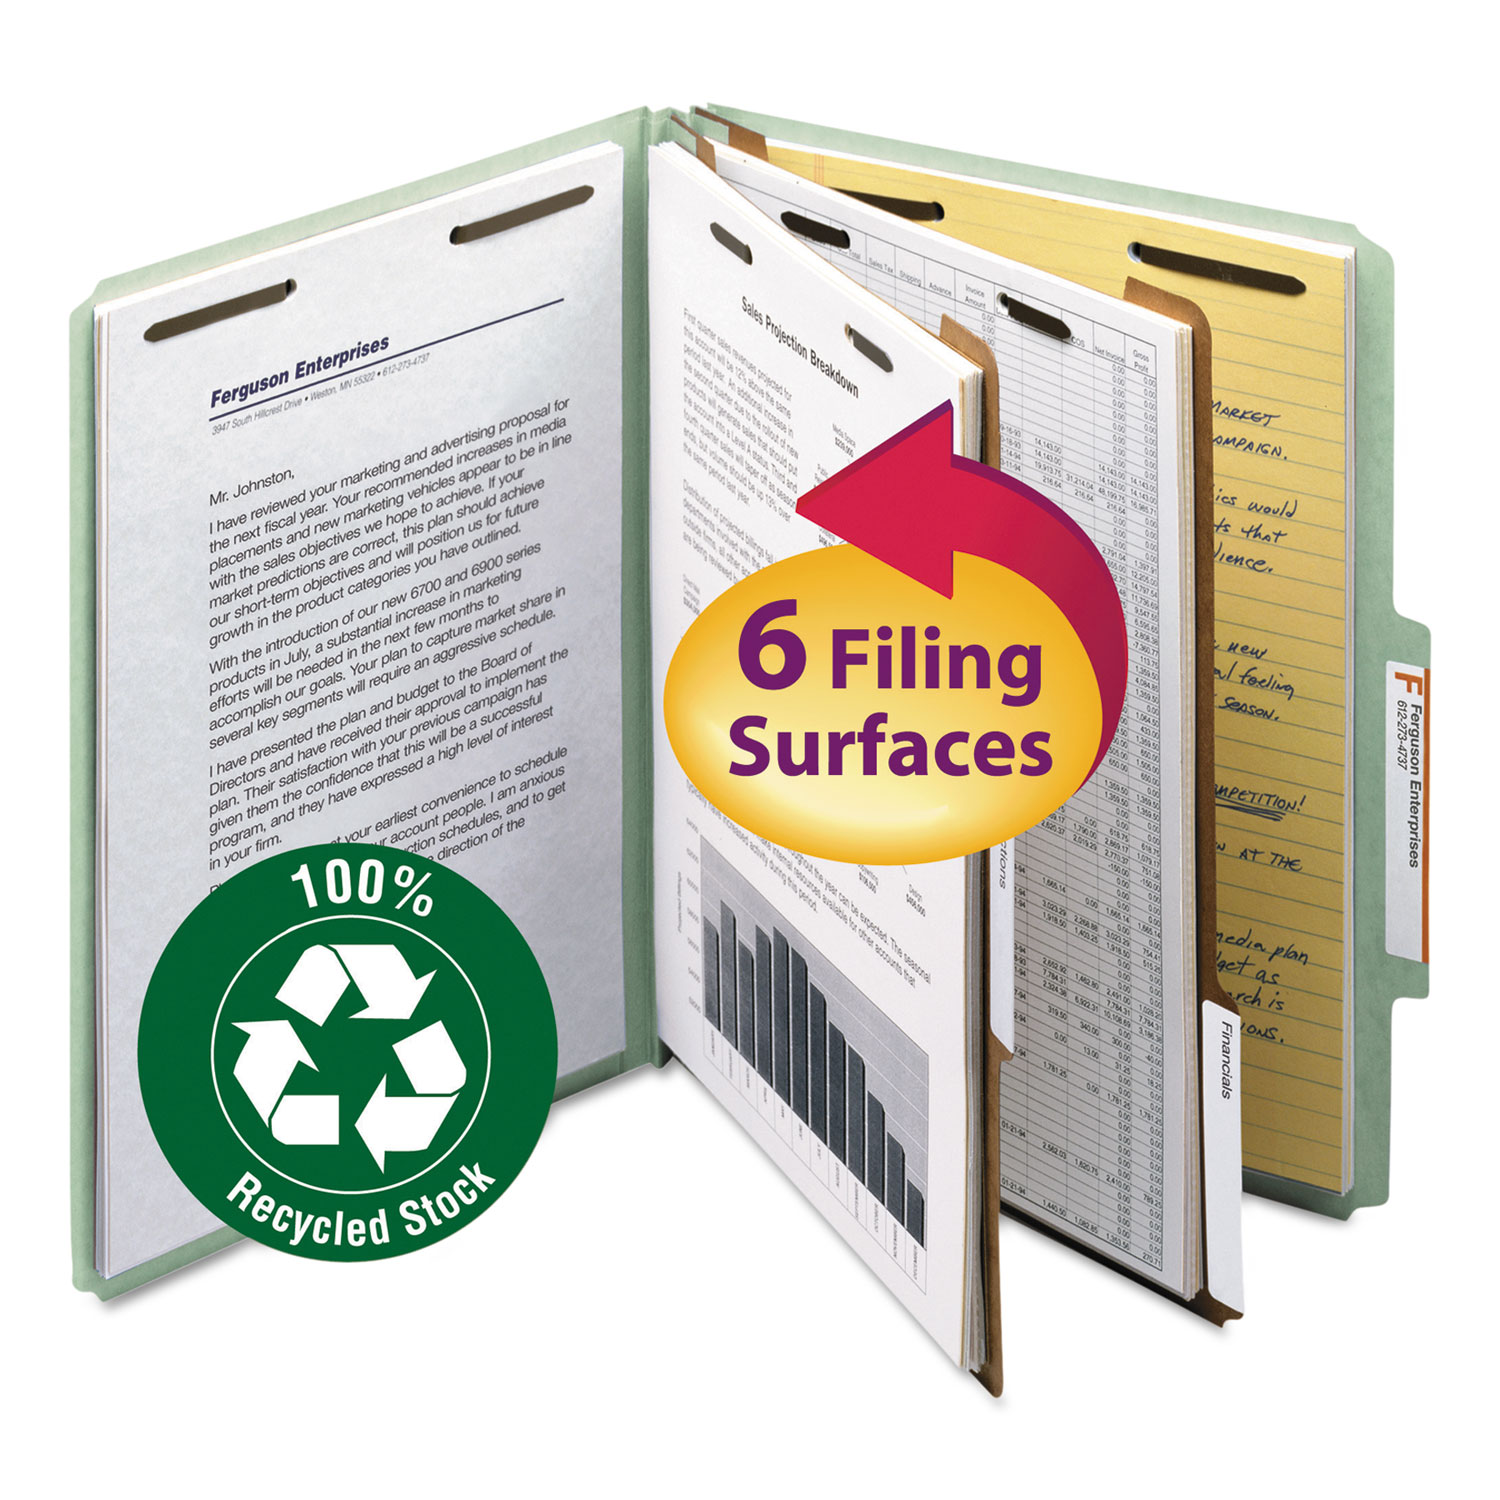  Smead 14023 100% Recycled Pressboard Classification Folders, 2 Dividers, Letter Size, Gray-Green, 10/Box (SMD14023) 